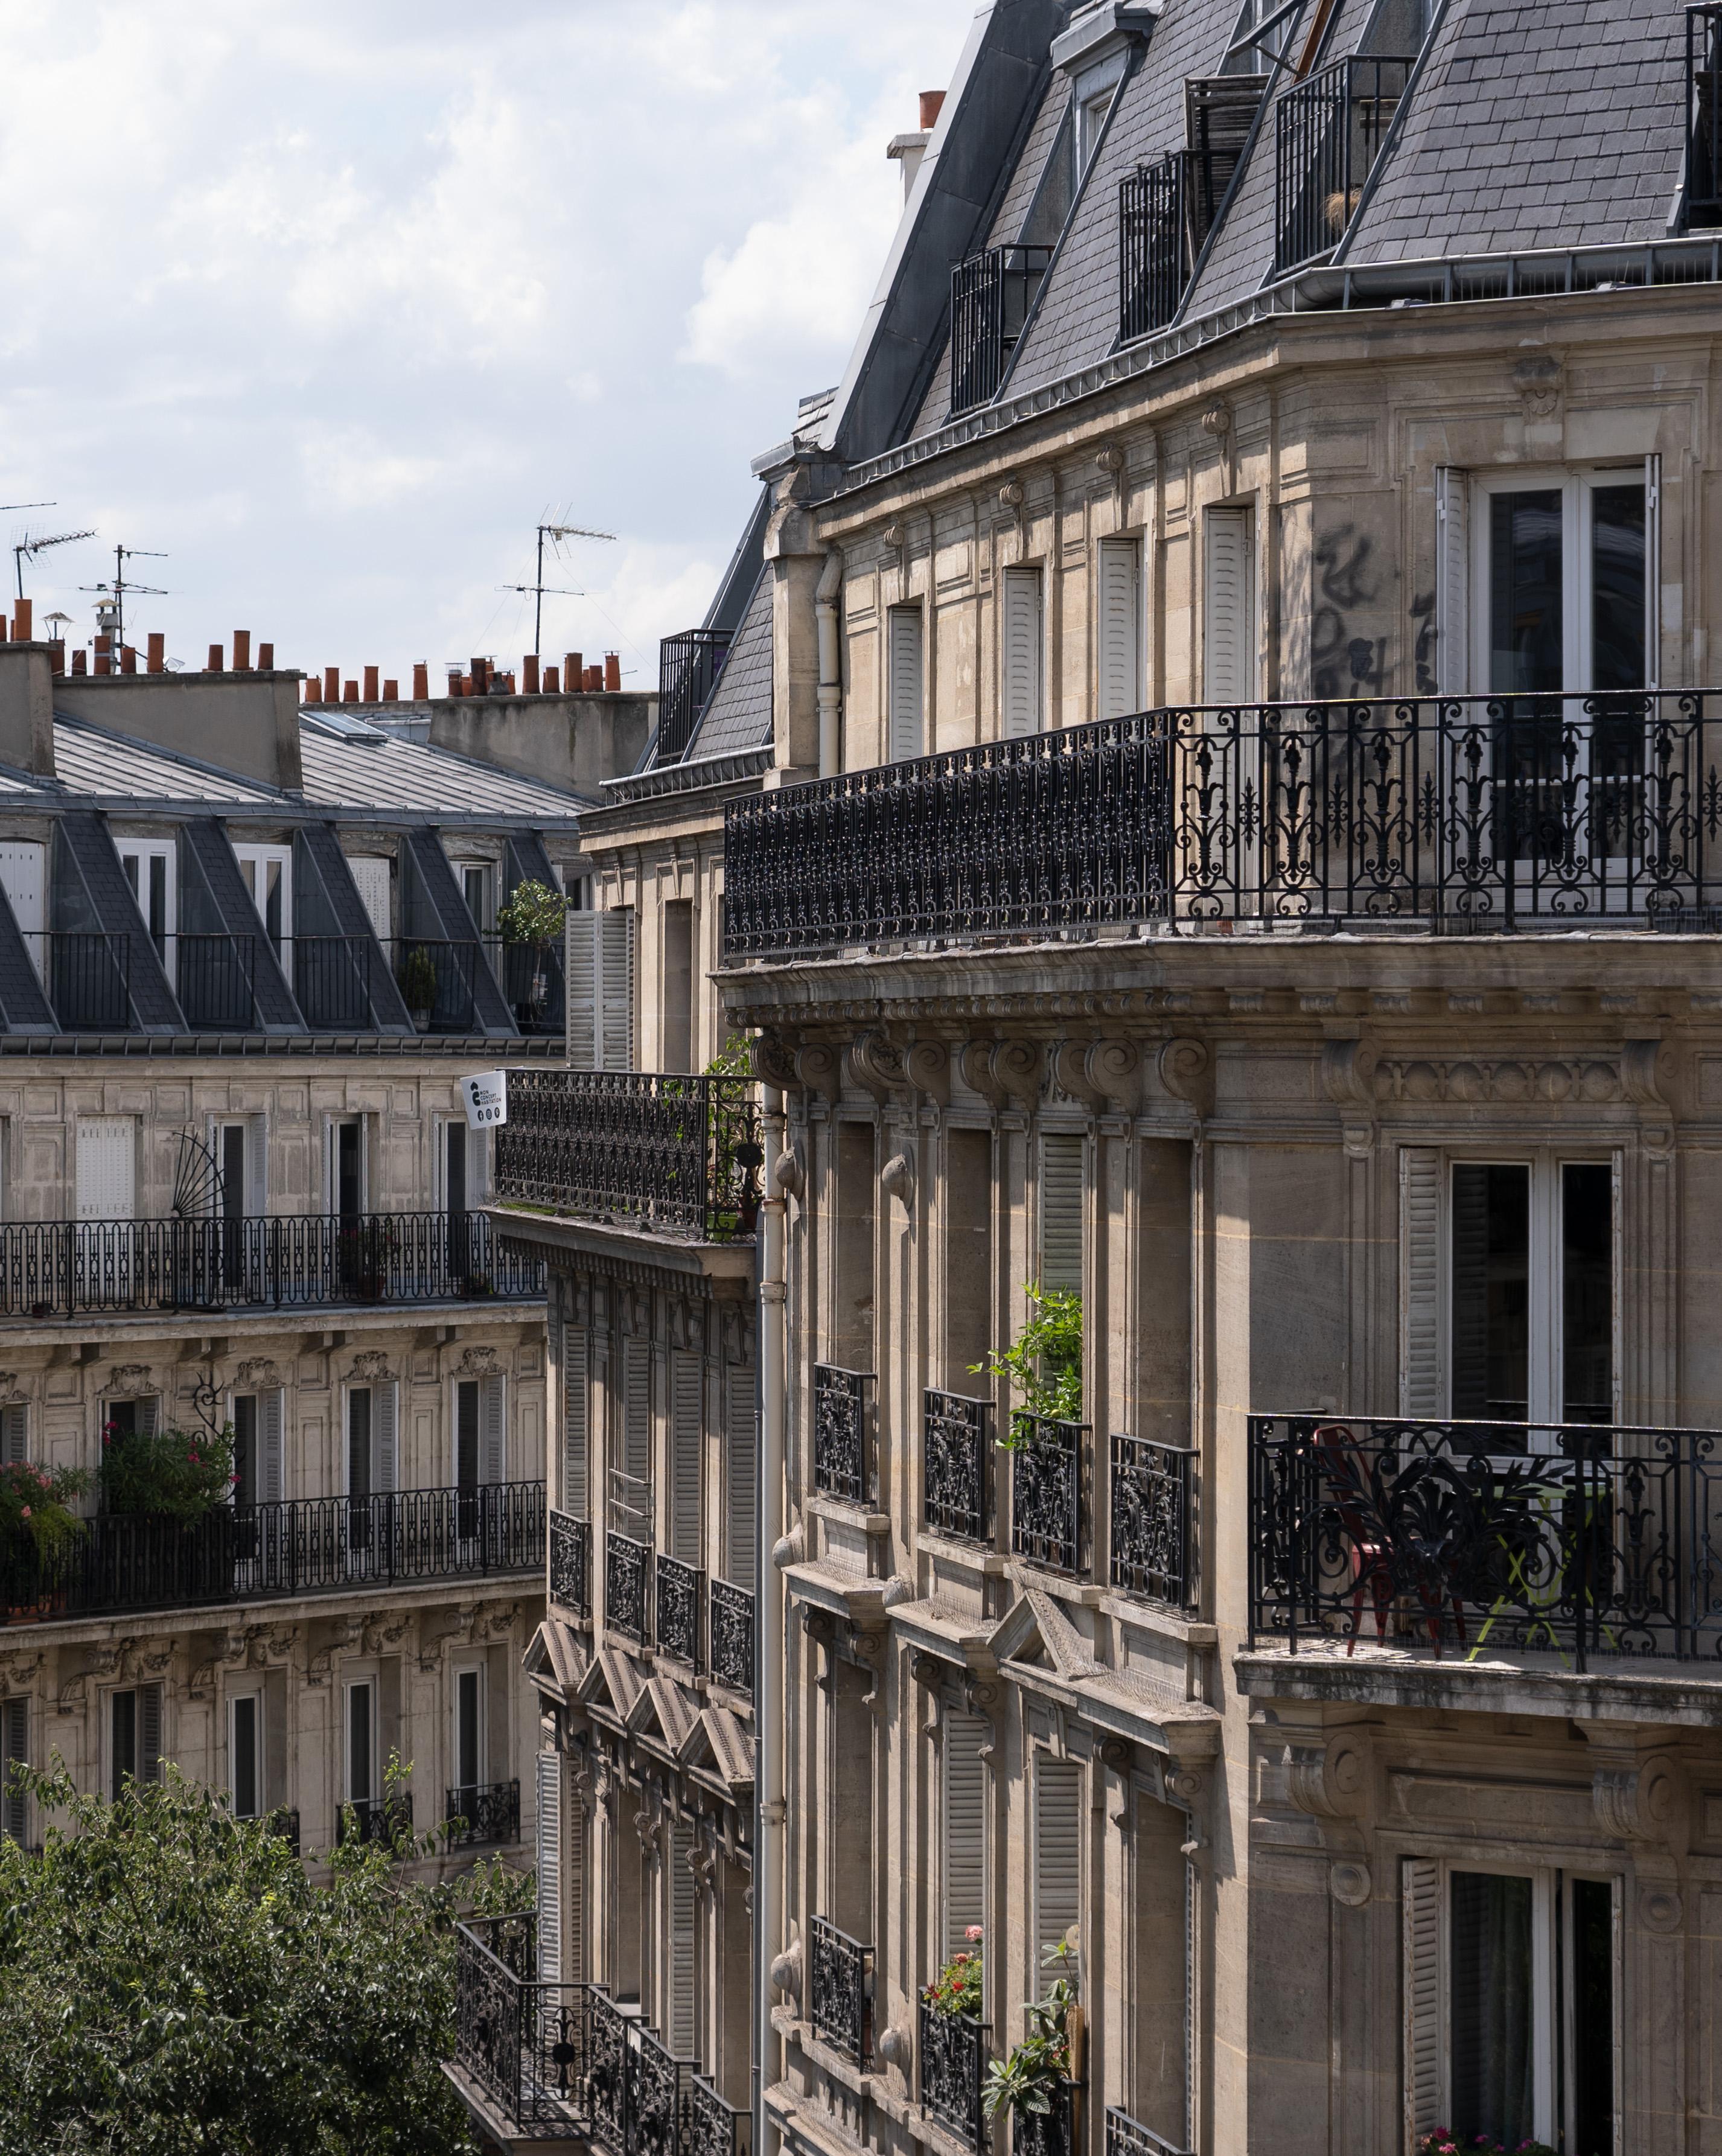 All about Haussmannian architecture